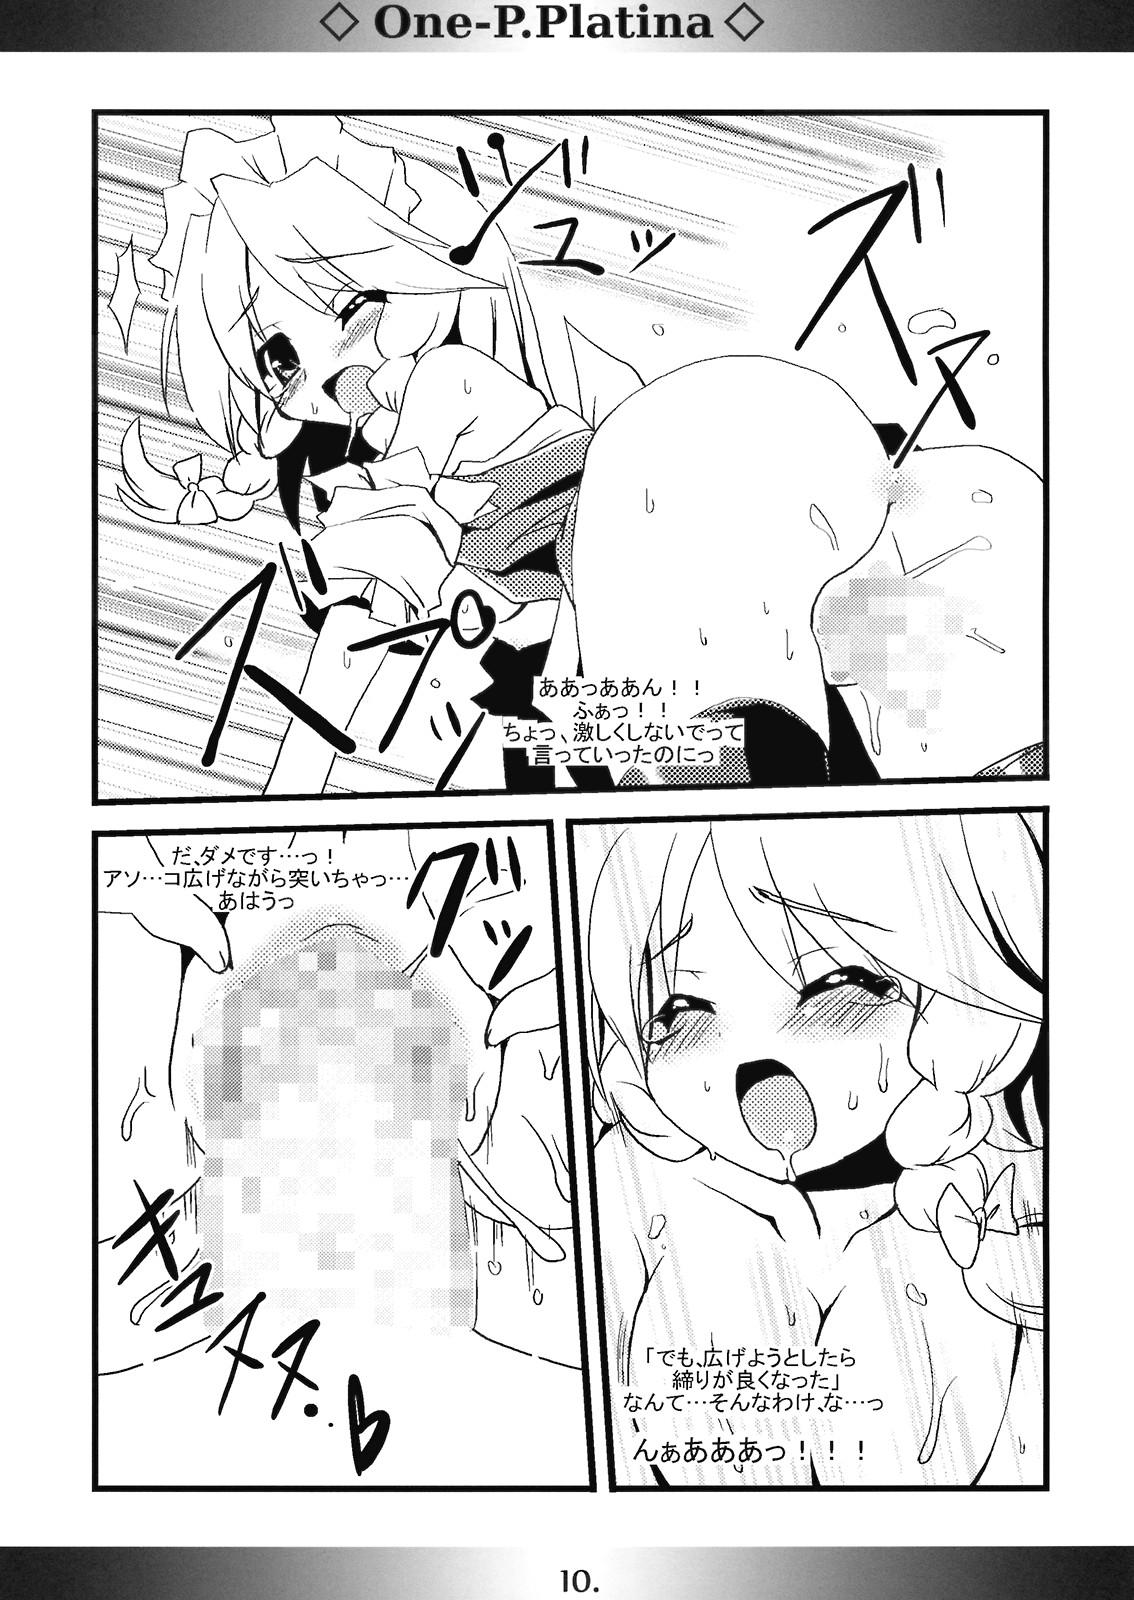 Trap One-P.Platina - Touhou project Porn Star - Page 10